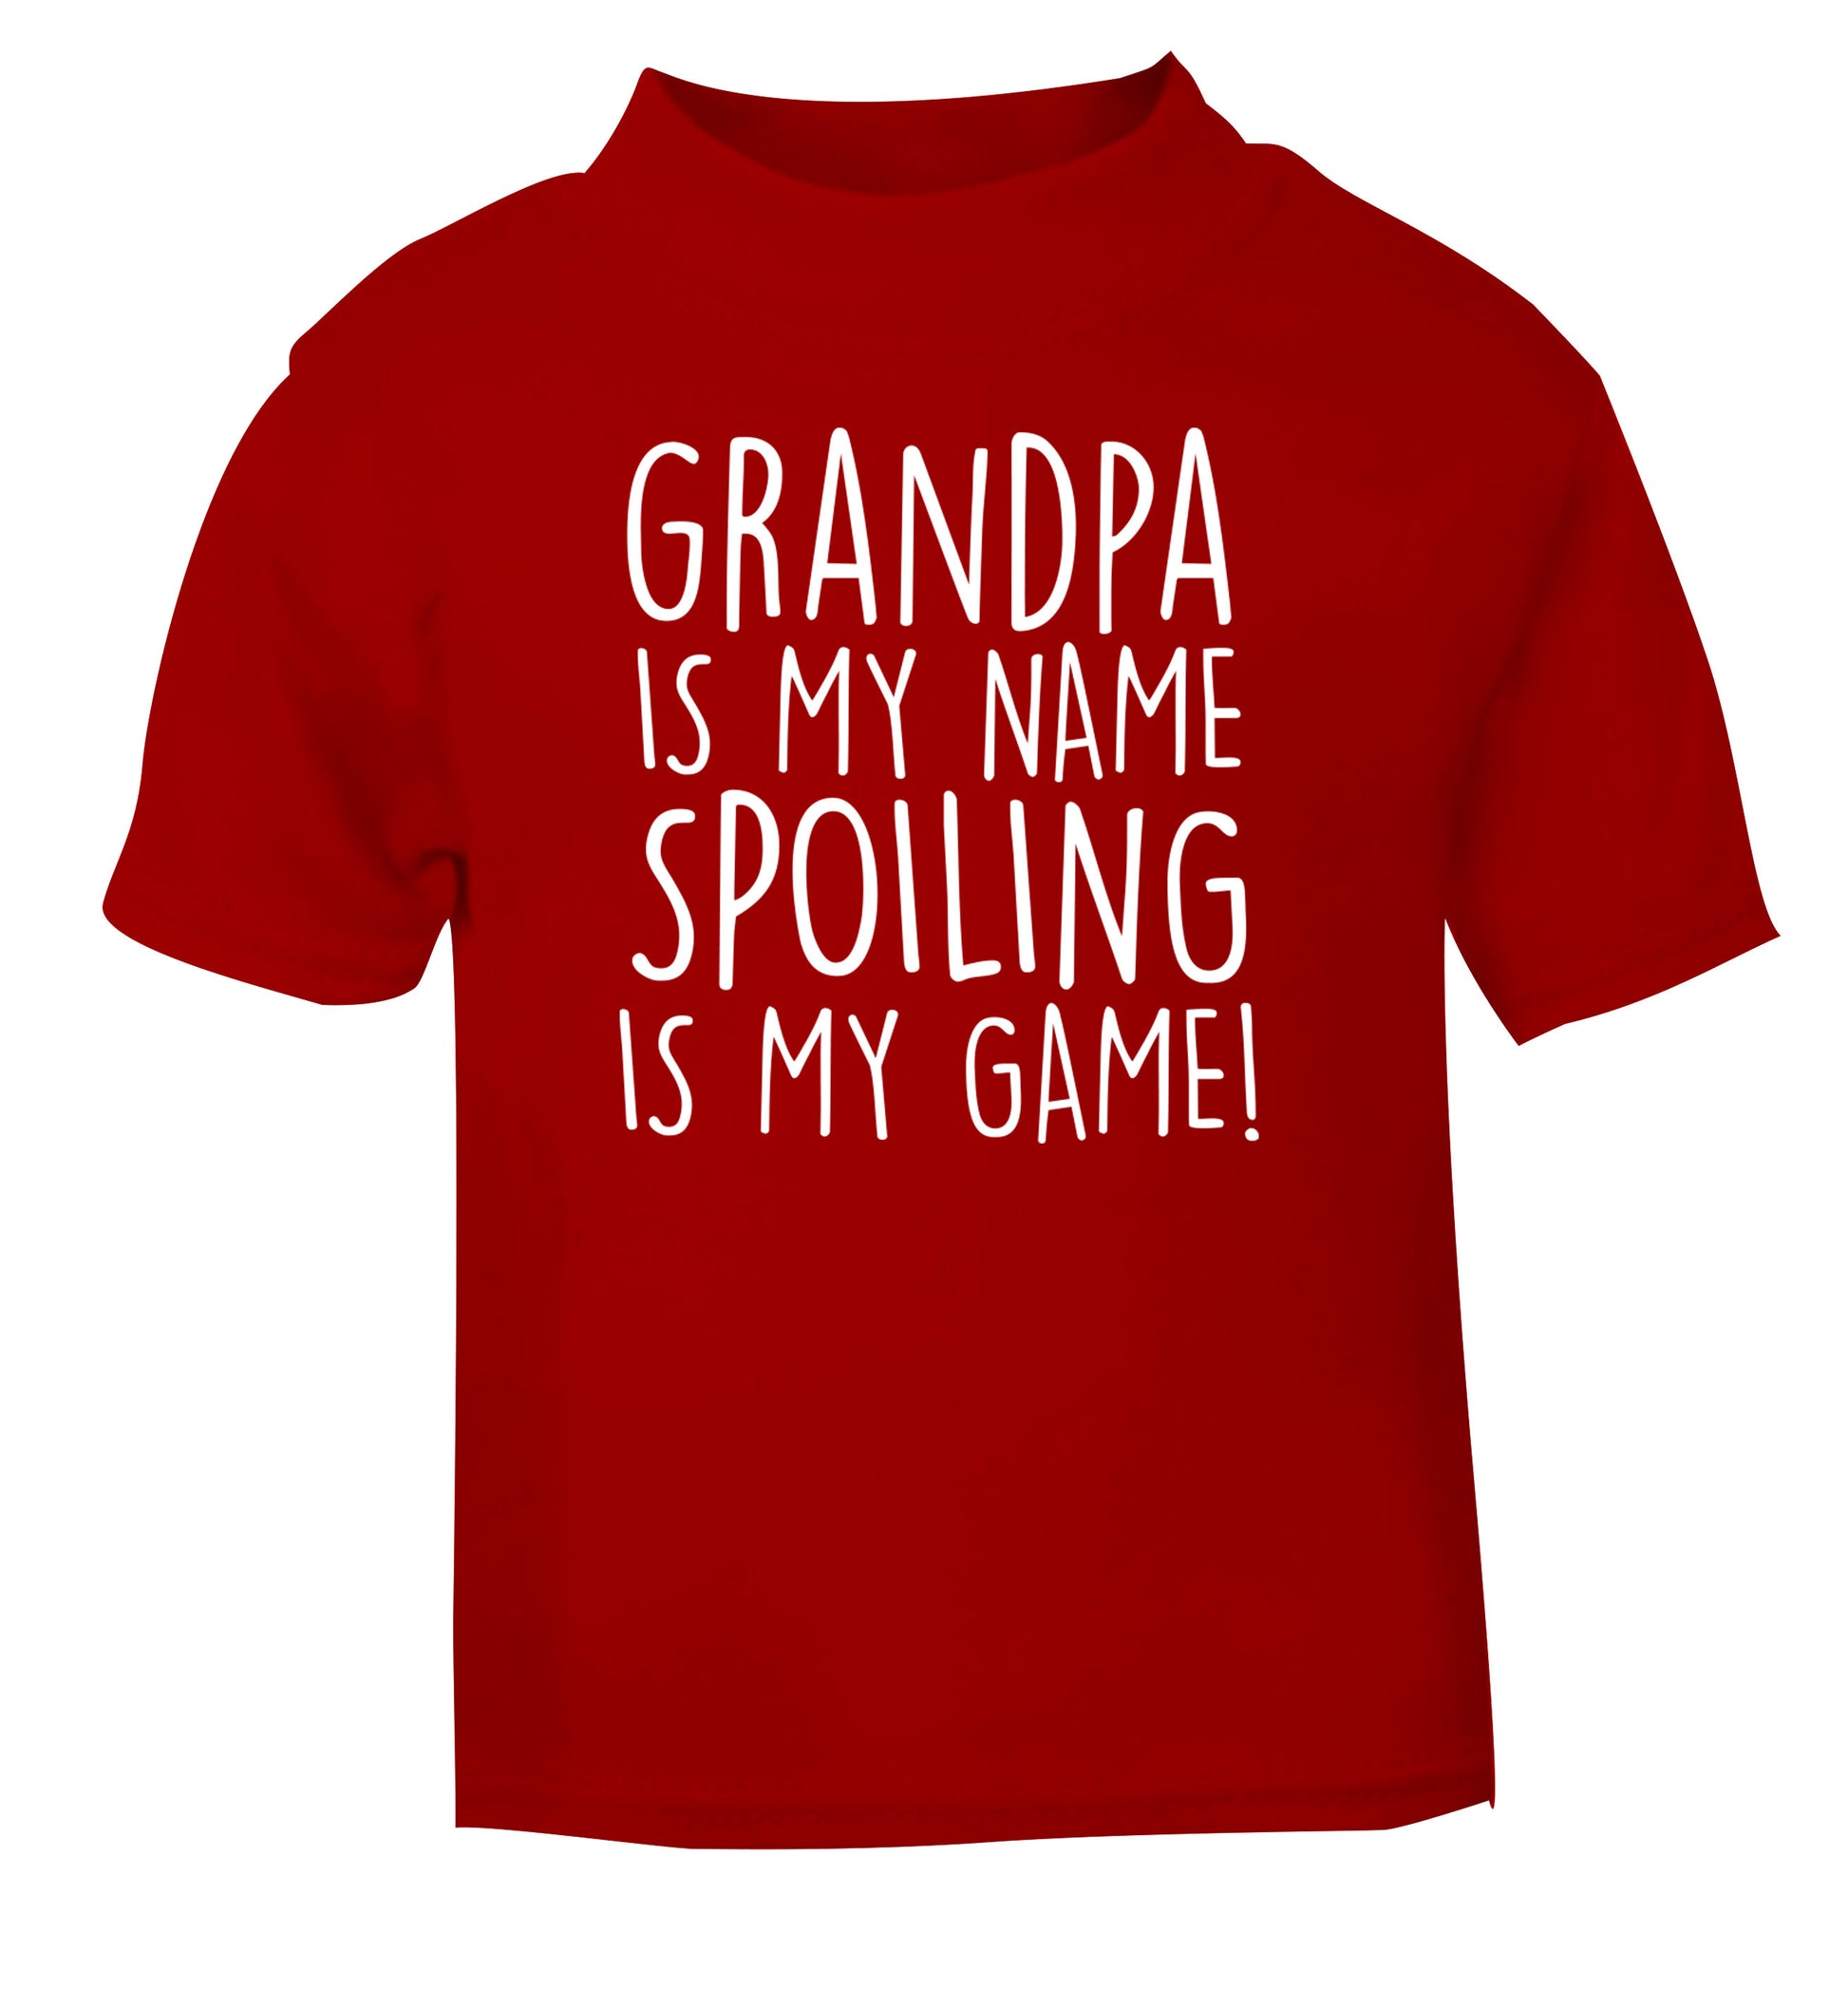 Grandpa is my name, spoiling is my game red Baby Toddler Tshirt 2 Years